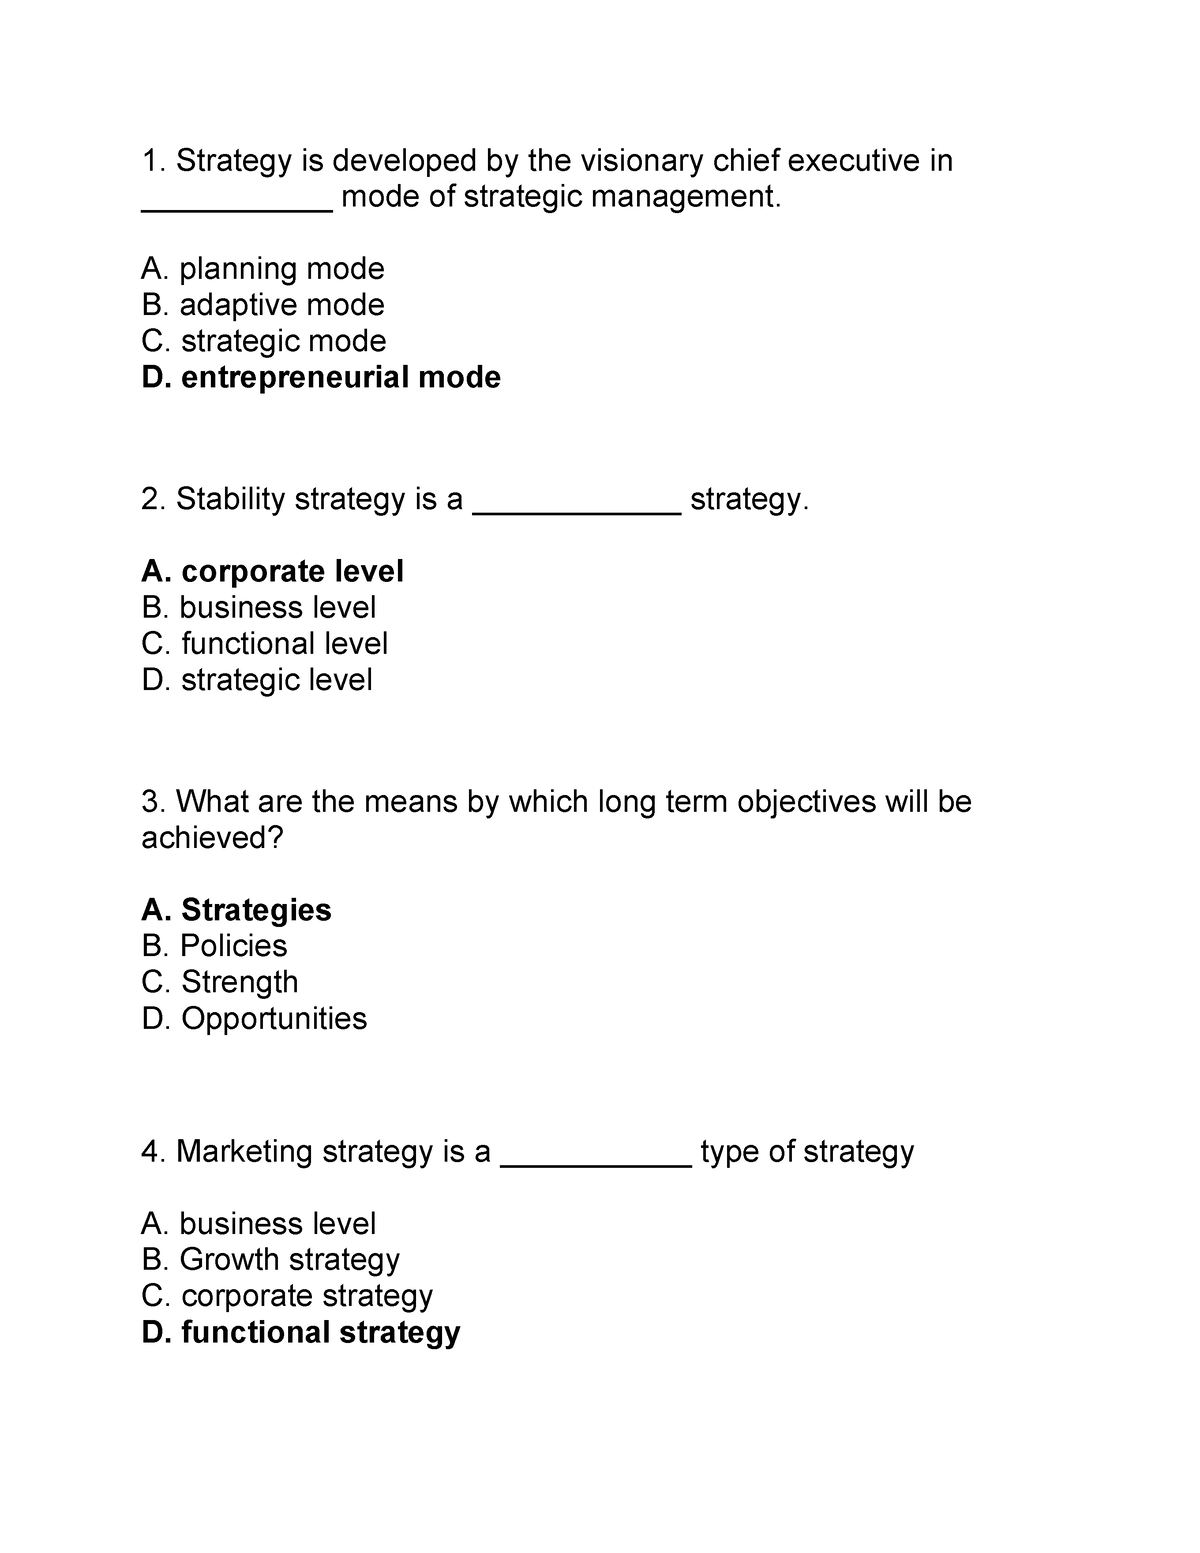 business planning and entrepreneurial management mcq